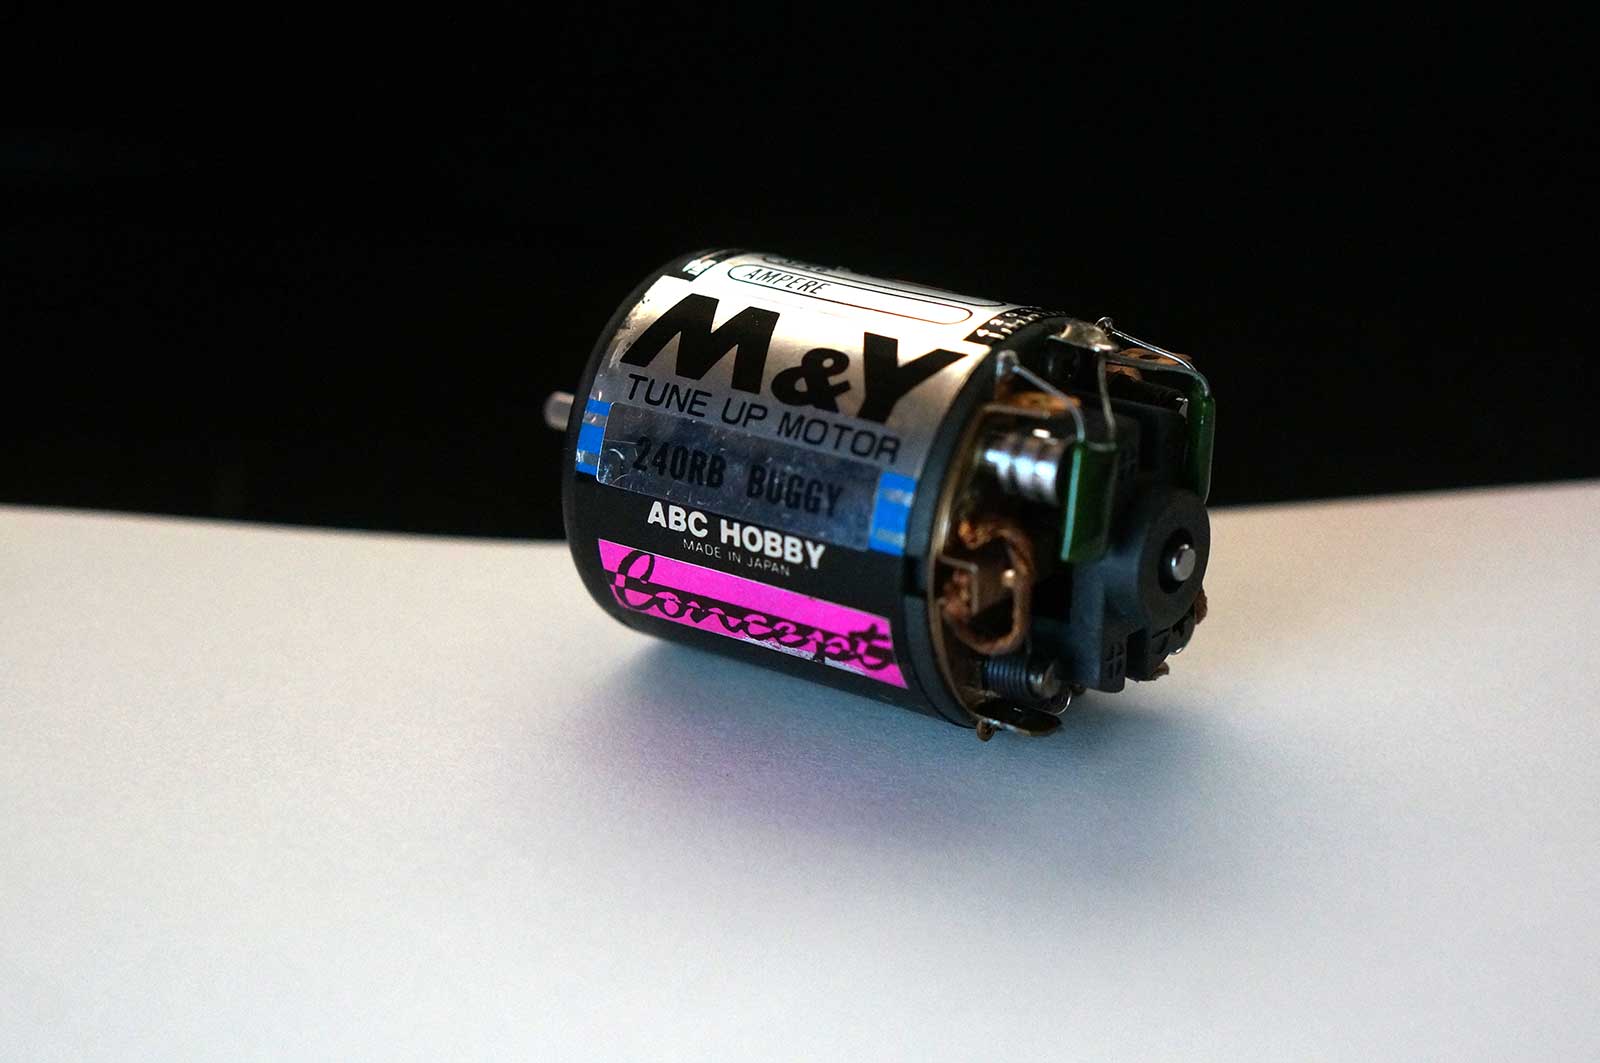 ABC Hobby M&Y RC Motor 240RB Buggy Concept